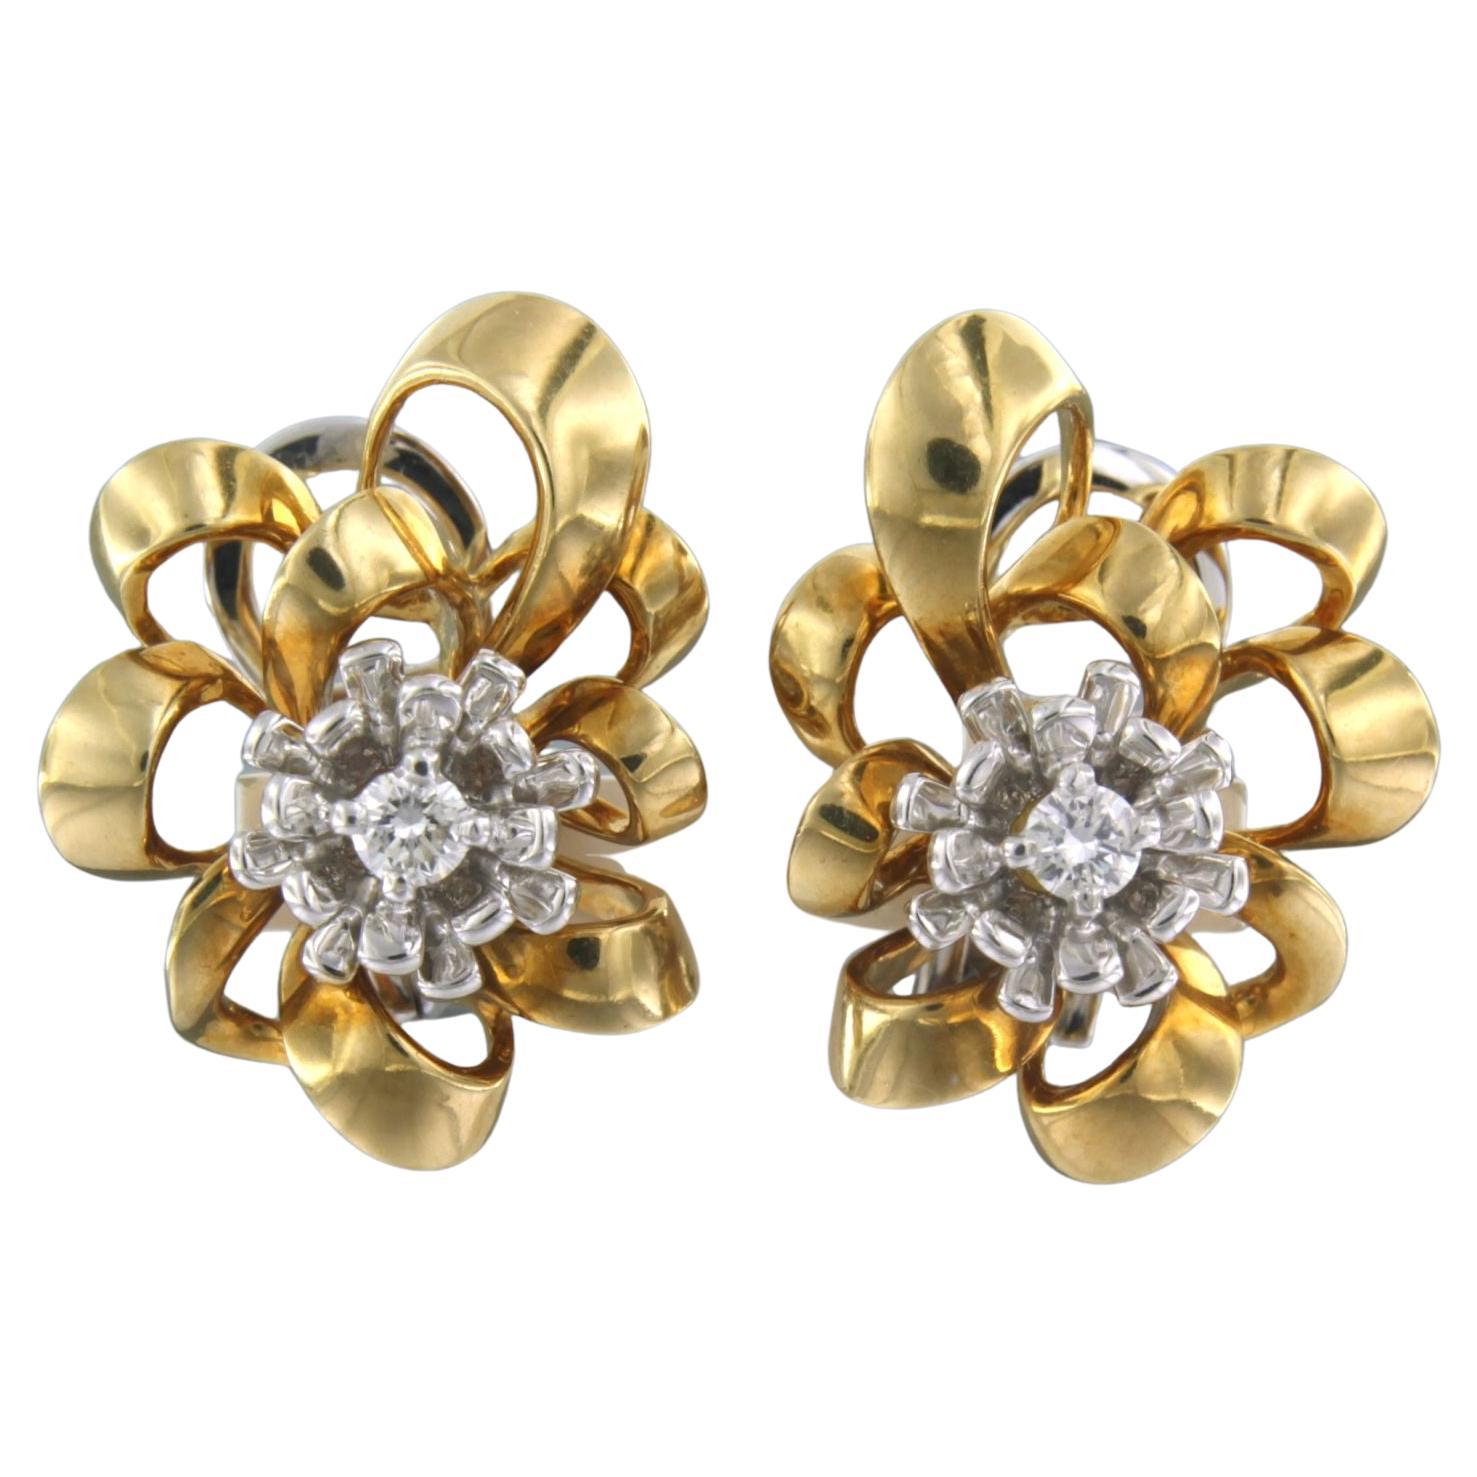 GOLD BAUER - Earrings set with diamonds 18k bicolour gold For Sale